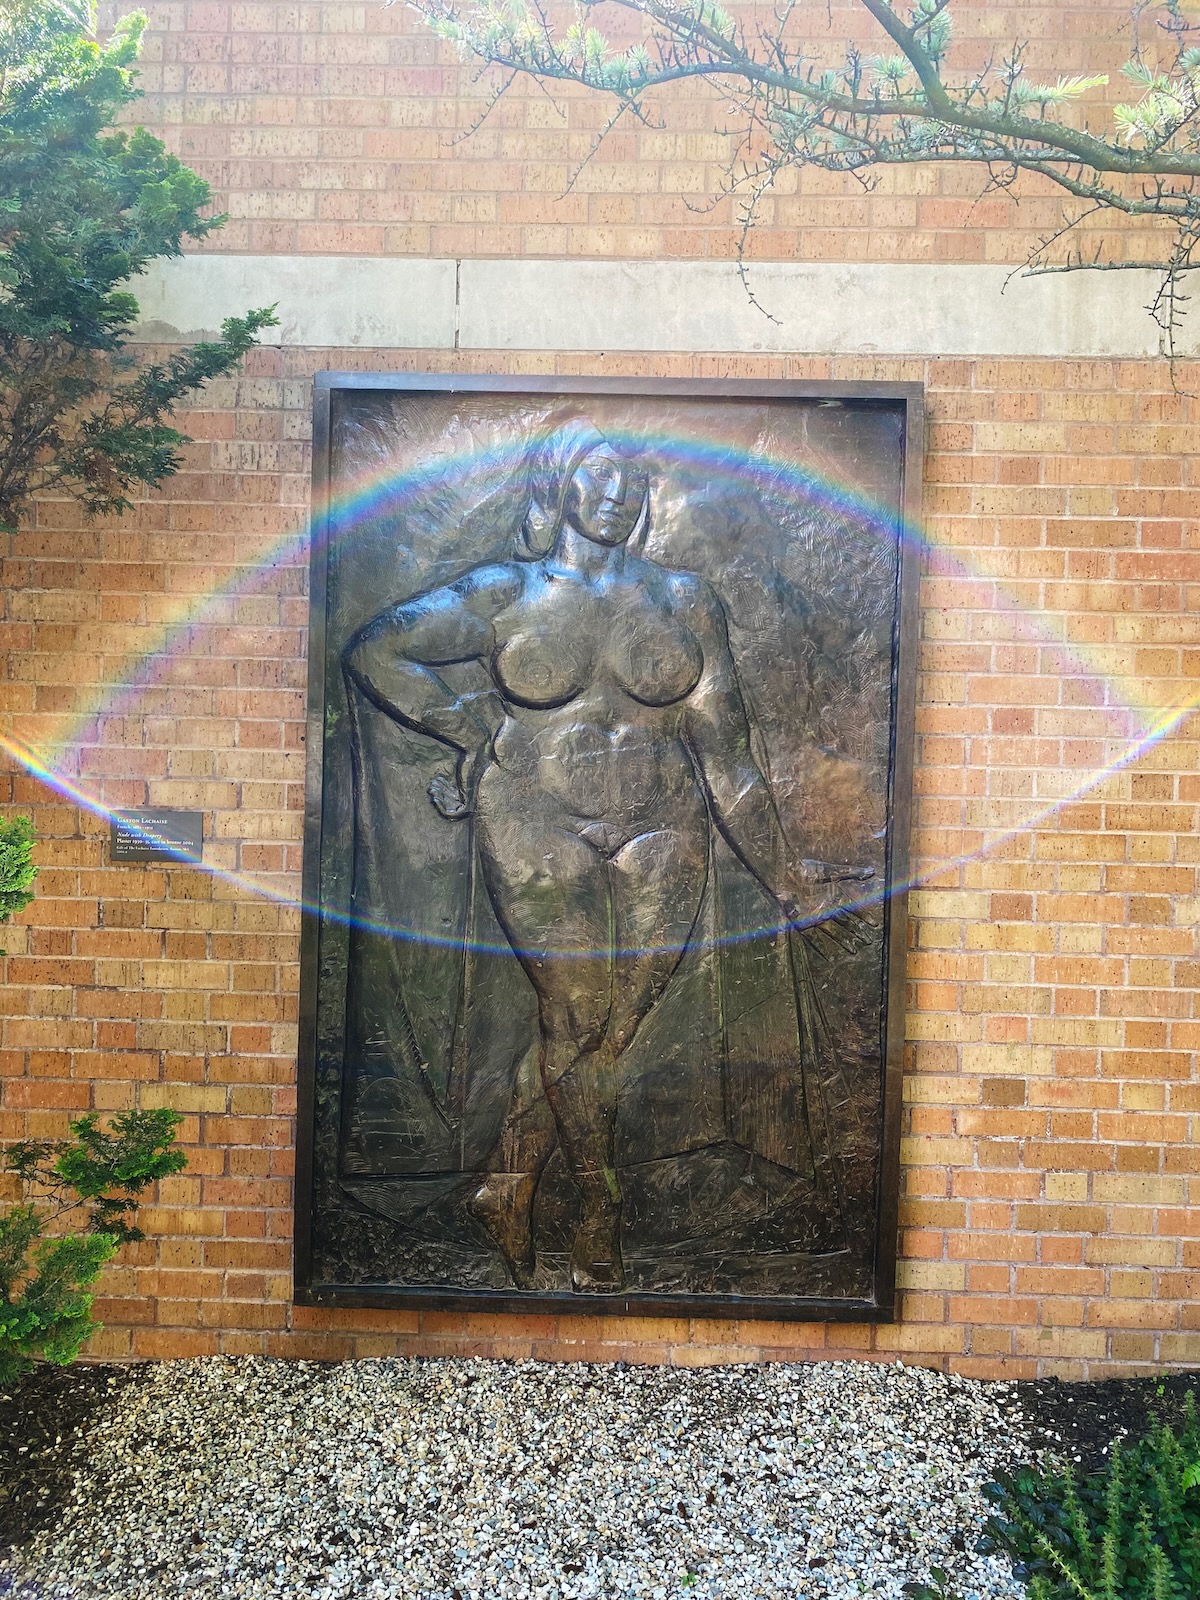 A bronze sculpture of a nude woman with cloth draped about her head and shoulders, mounted on a brick wall. Light streaming over the wall is creating a lens flare shaped like an eye.